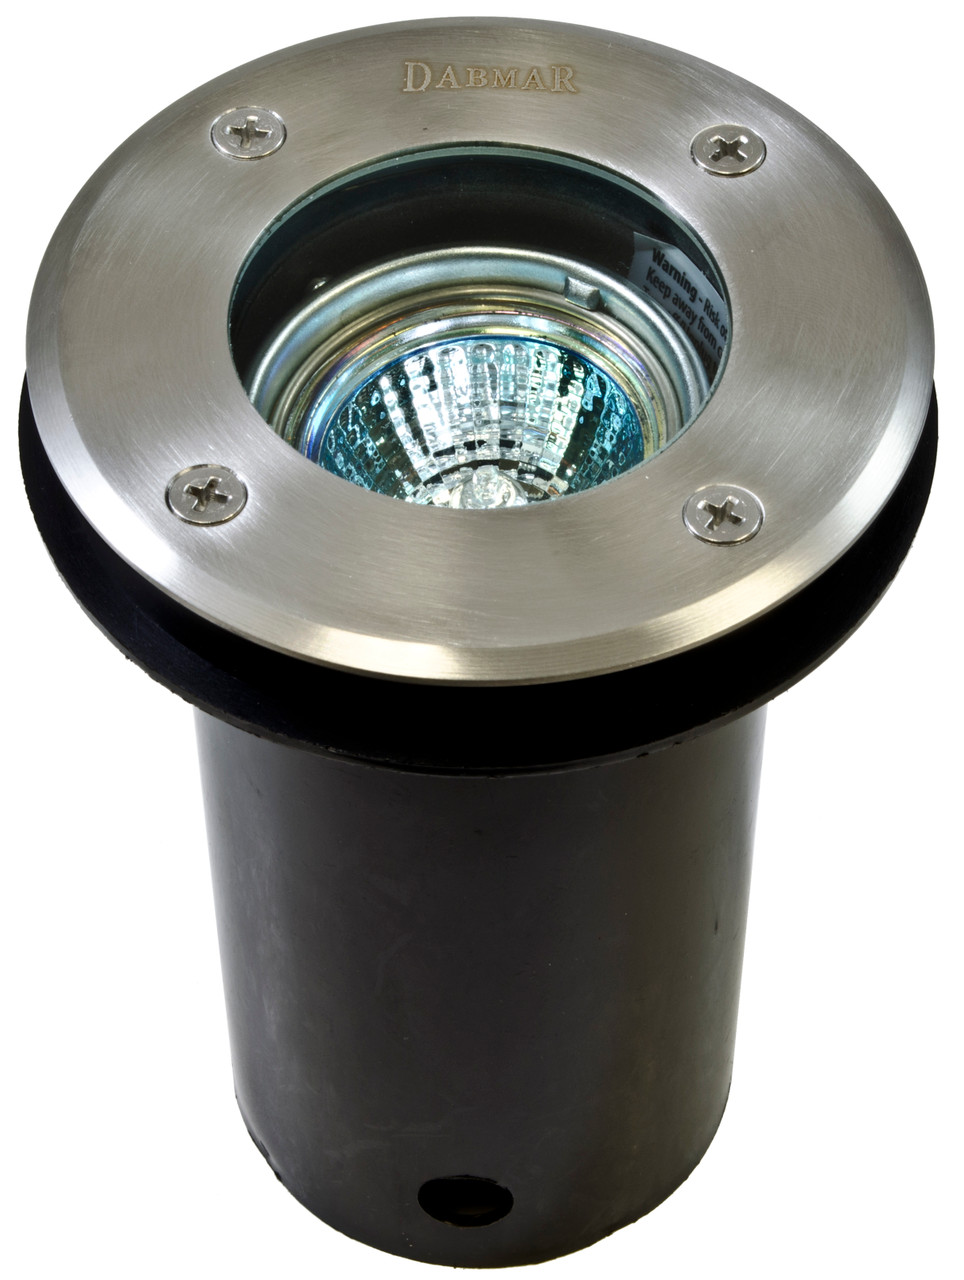 DABMAR LIGHTING LV314-SS Stainless Steel In-Ground Well Light with Adjustable Lamp, Stainless Steel